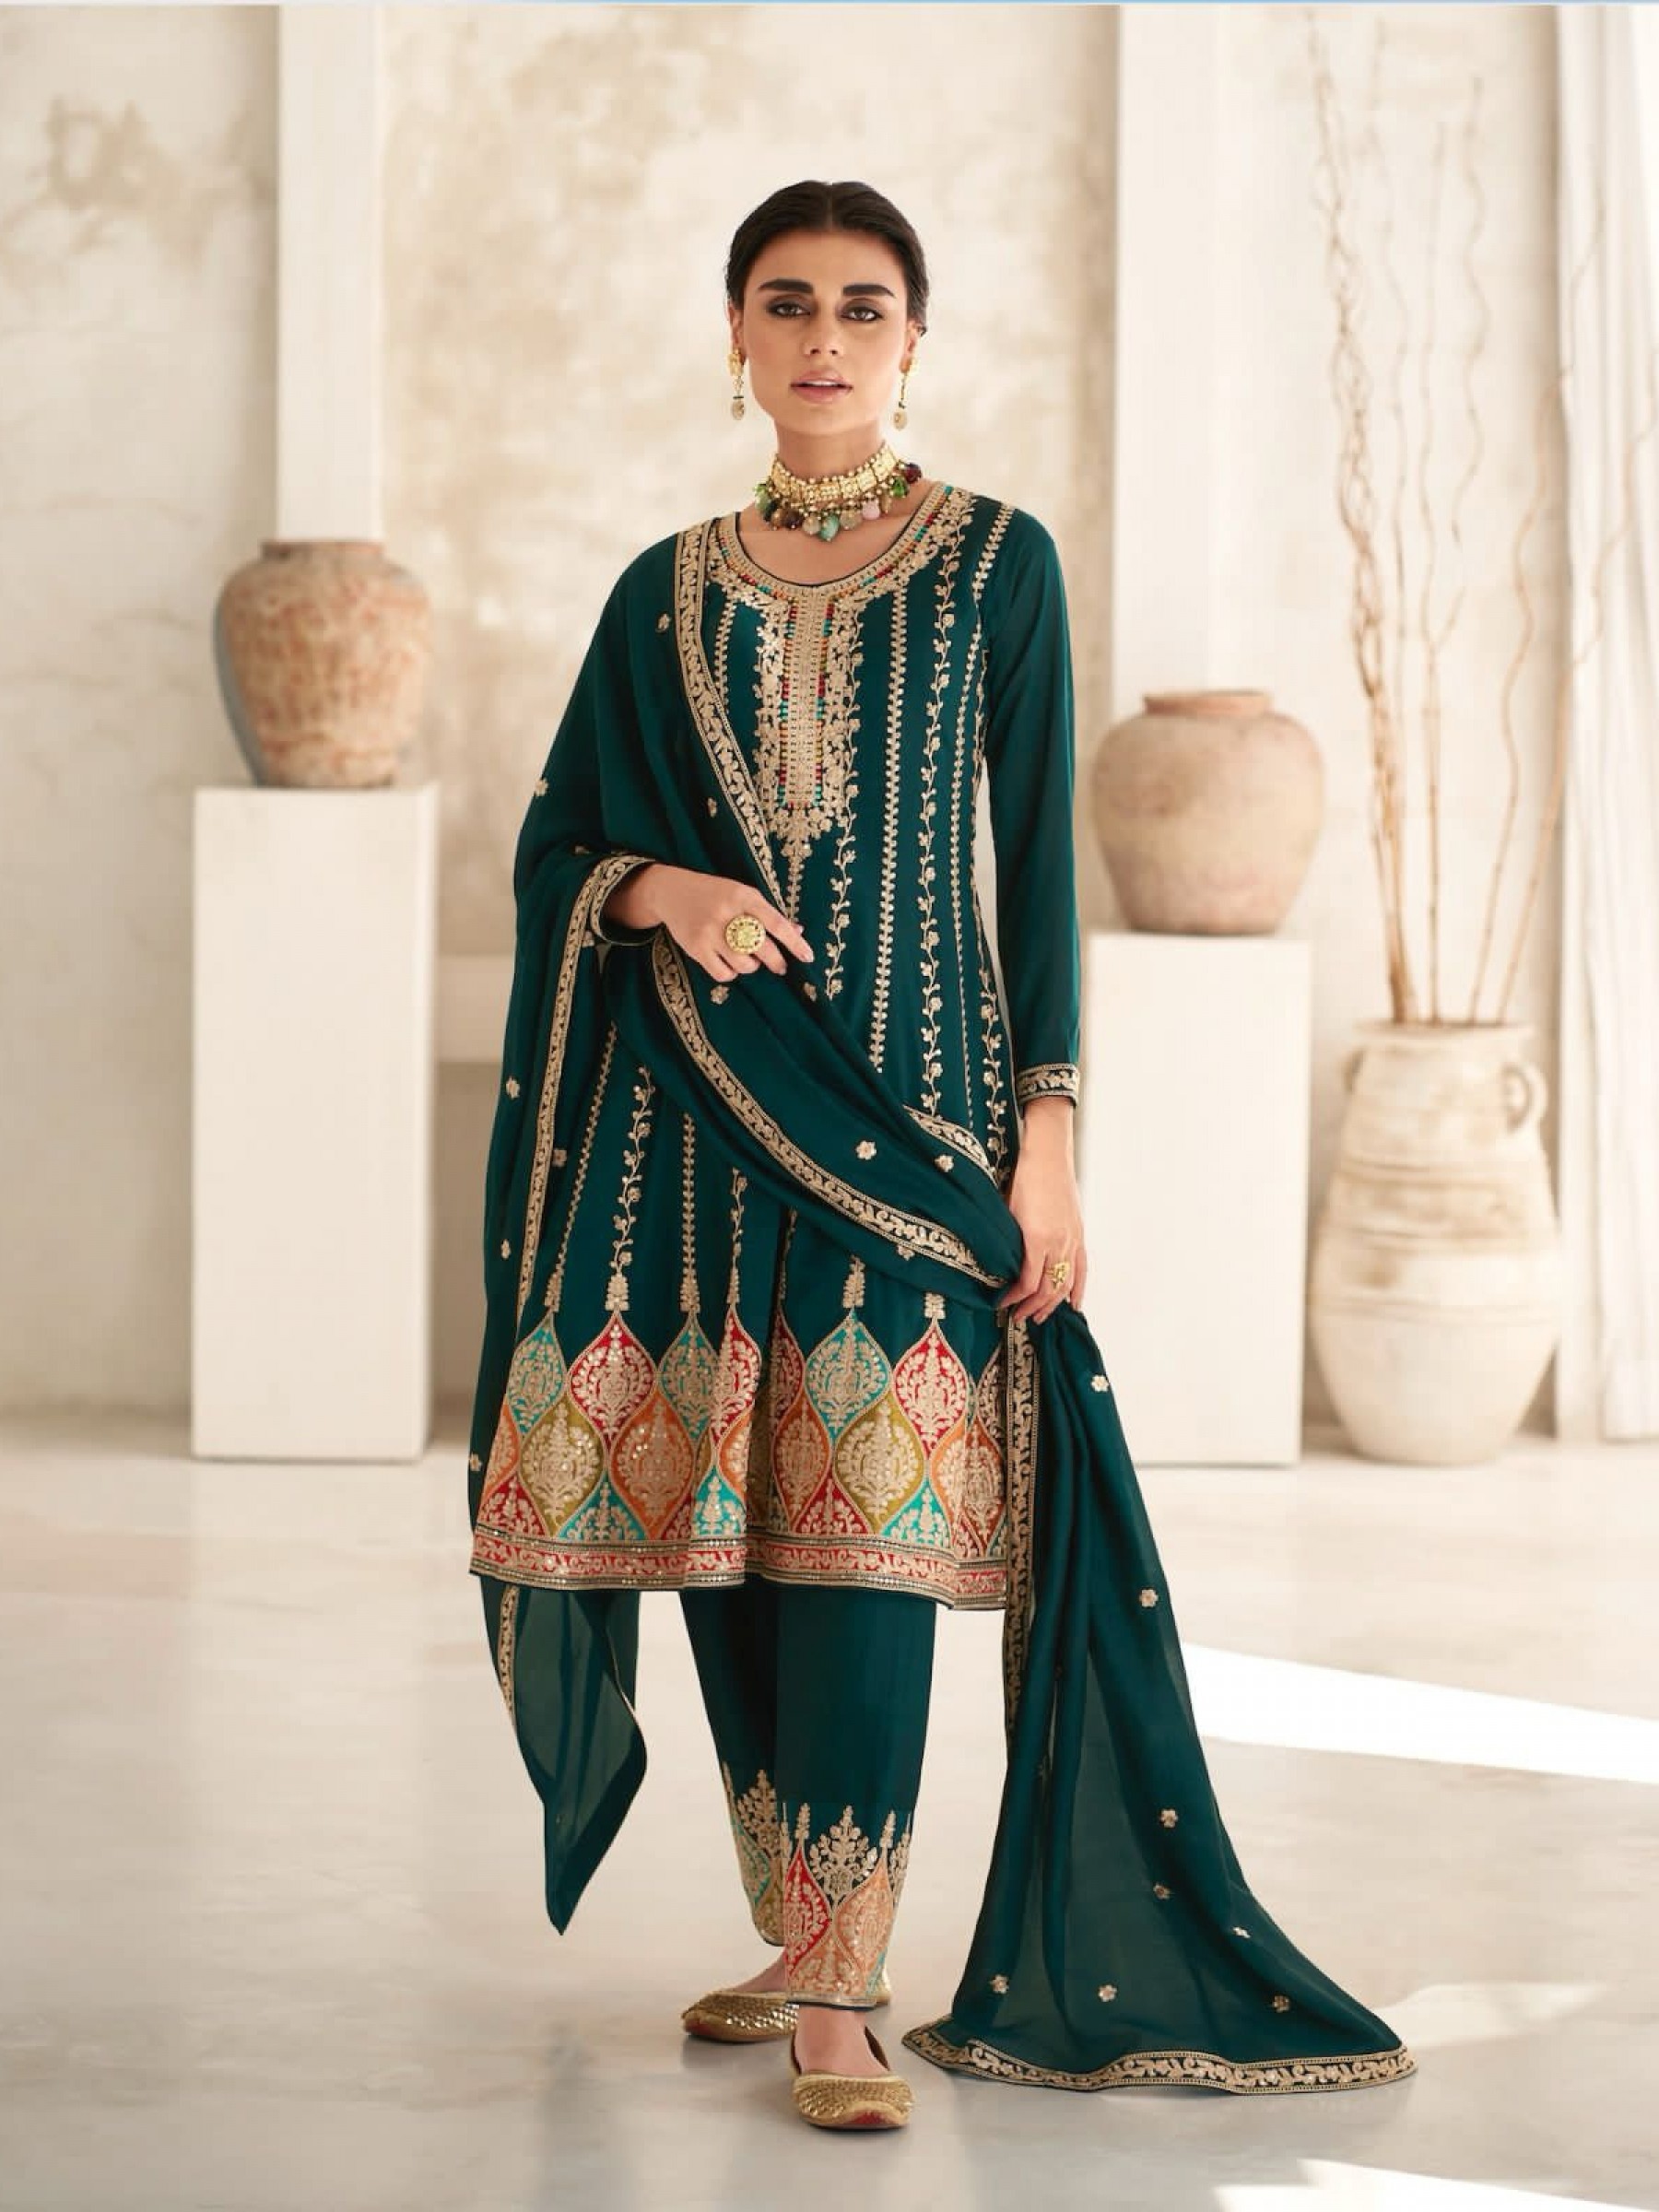 PREMIUM SILK  Silk Party Wear Suit in Teal Green Color with Embroidery Work